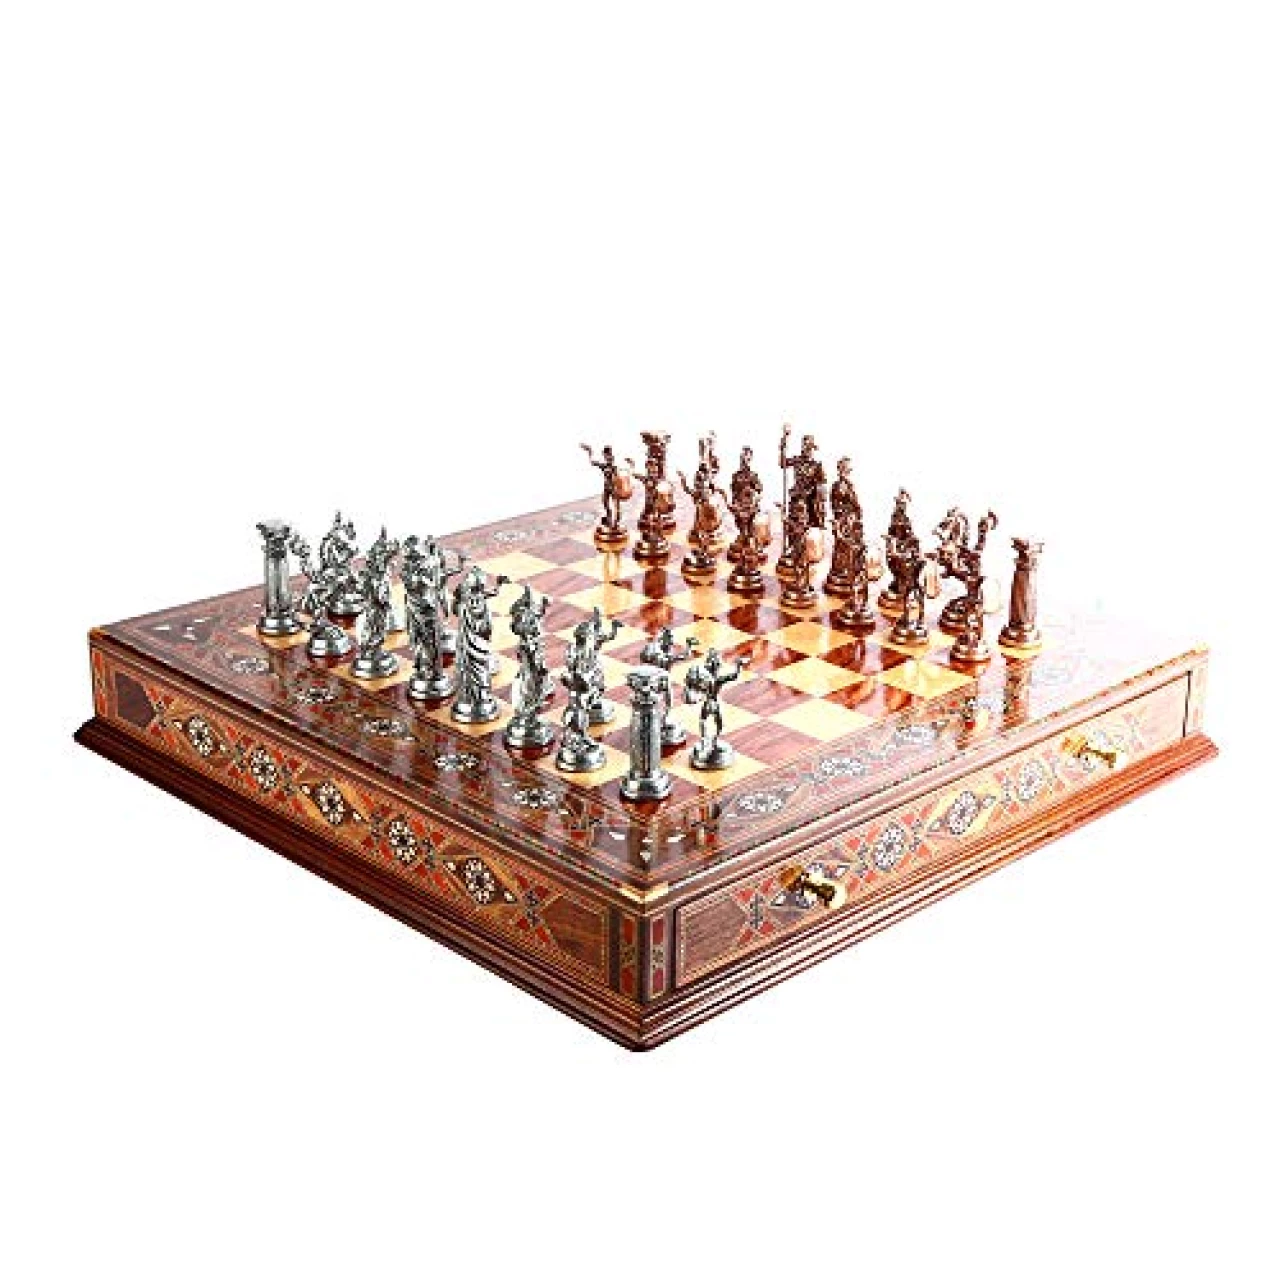 GiftHome Metal Chess Set for Adult Historical Antique Copper Rome Figures Handmade Pieces and Natural Solid Wooden Chess Board with Original Pearl Around Board and Storage Inside King 4 inc